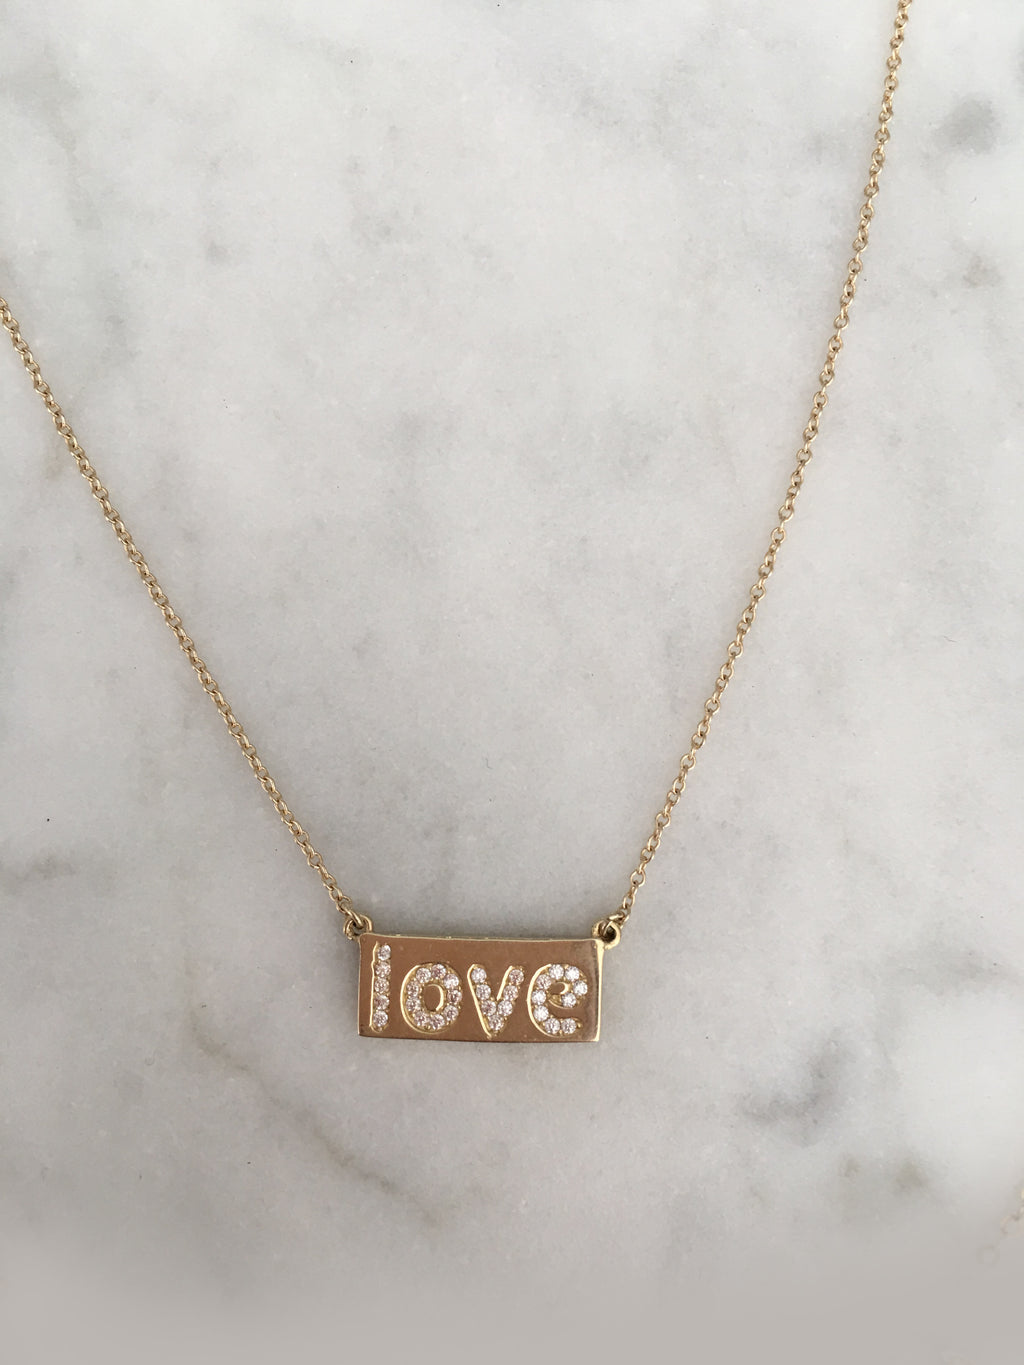 SOLID GOLD WITH WHITE CZ "LOVE NECKLACE"